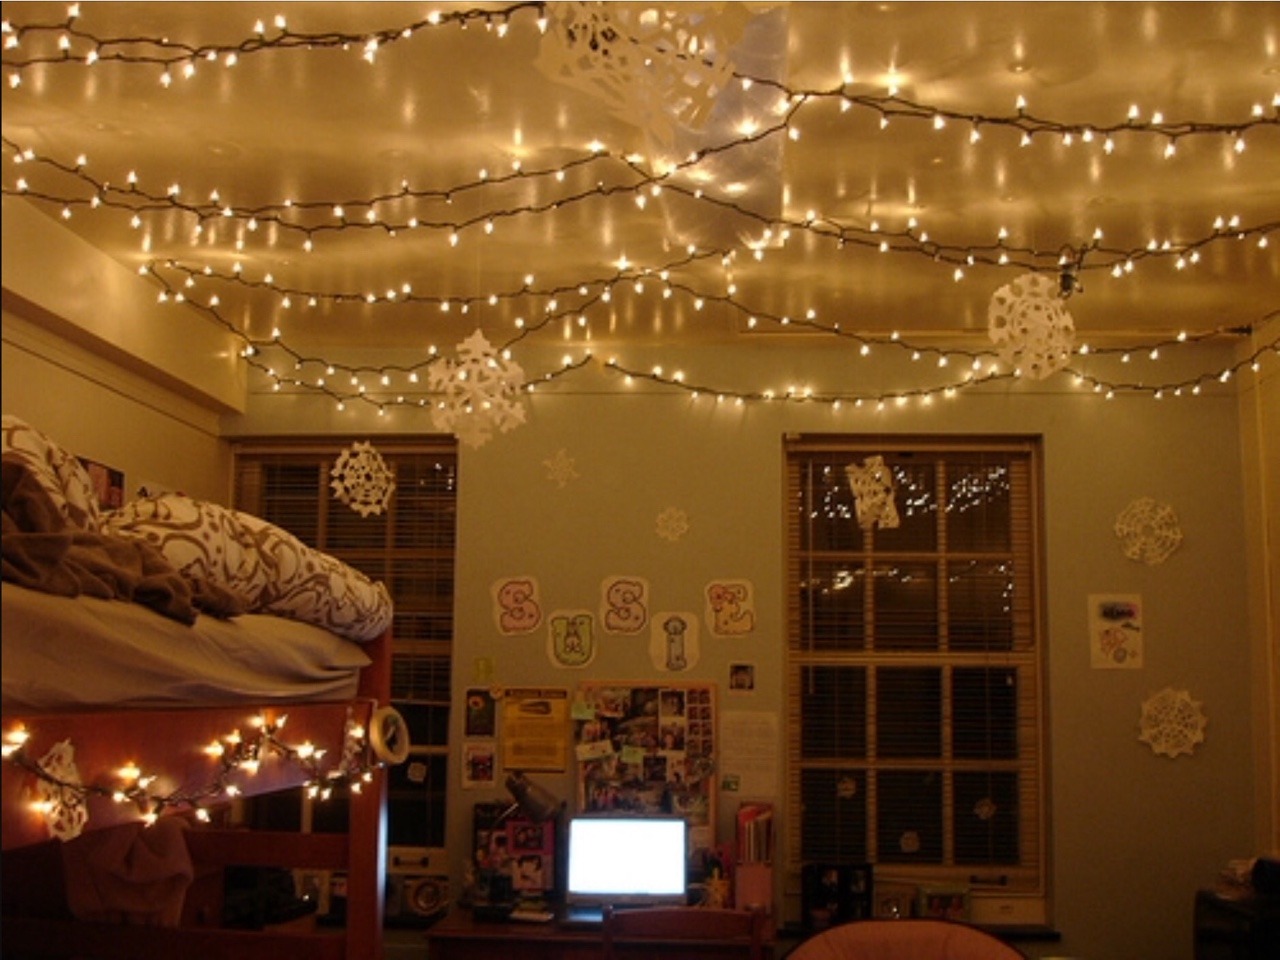 Inspiring Tumblr Room Ideas Love This Idea With The Lights The Lights At